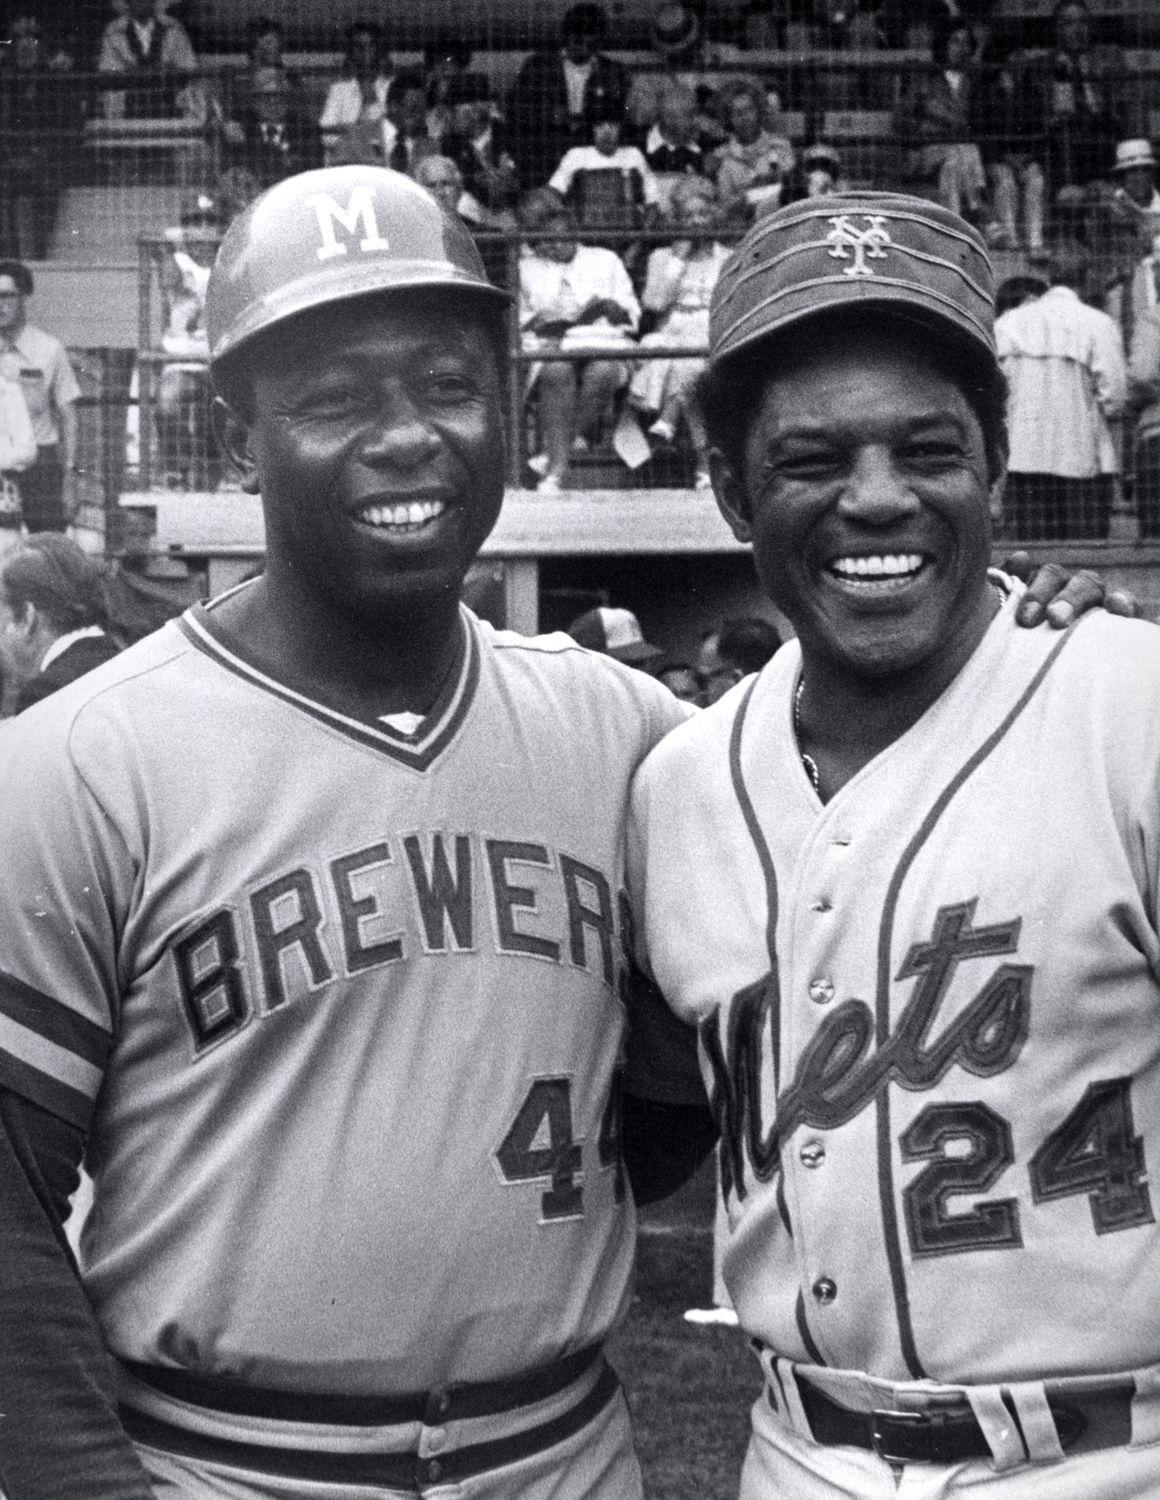 Hall of Fame outfielders Hank Aaron (L) and Willie Mays at Dodger